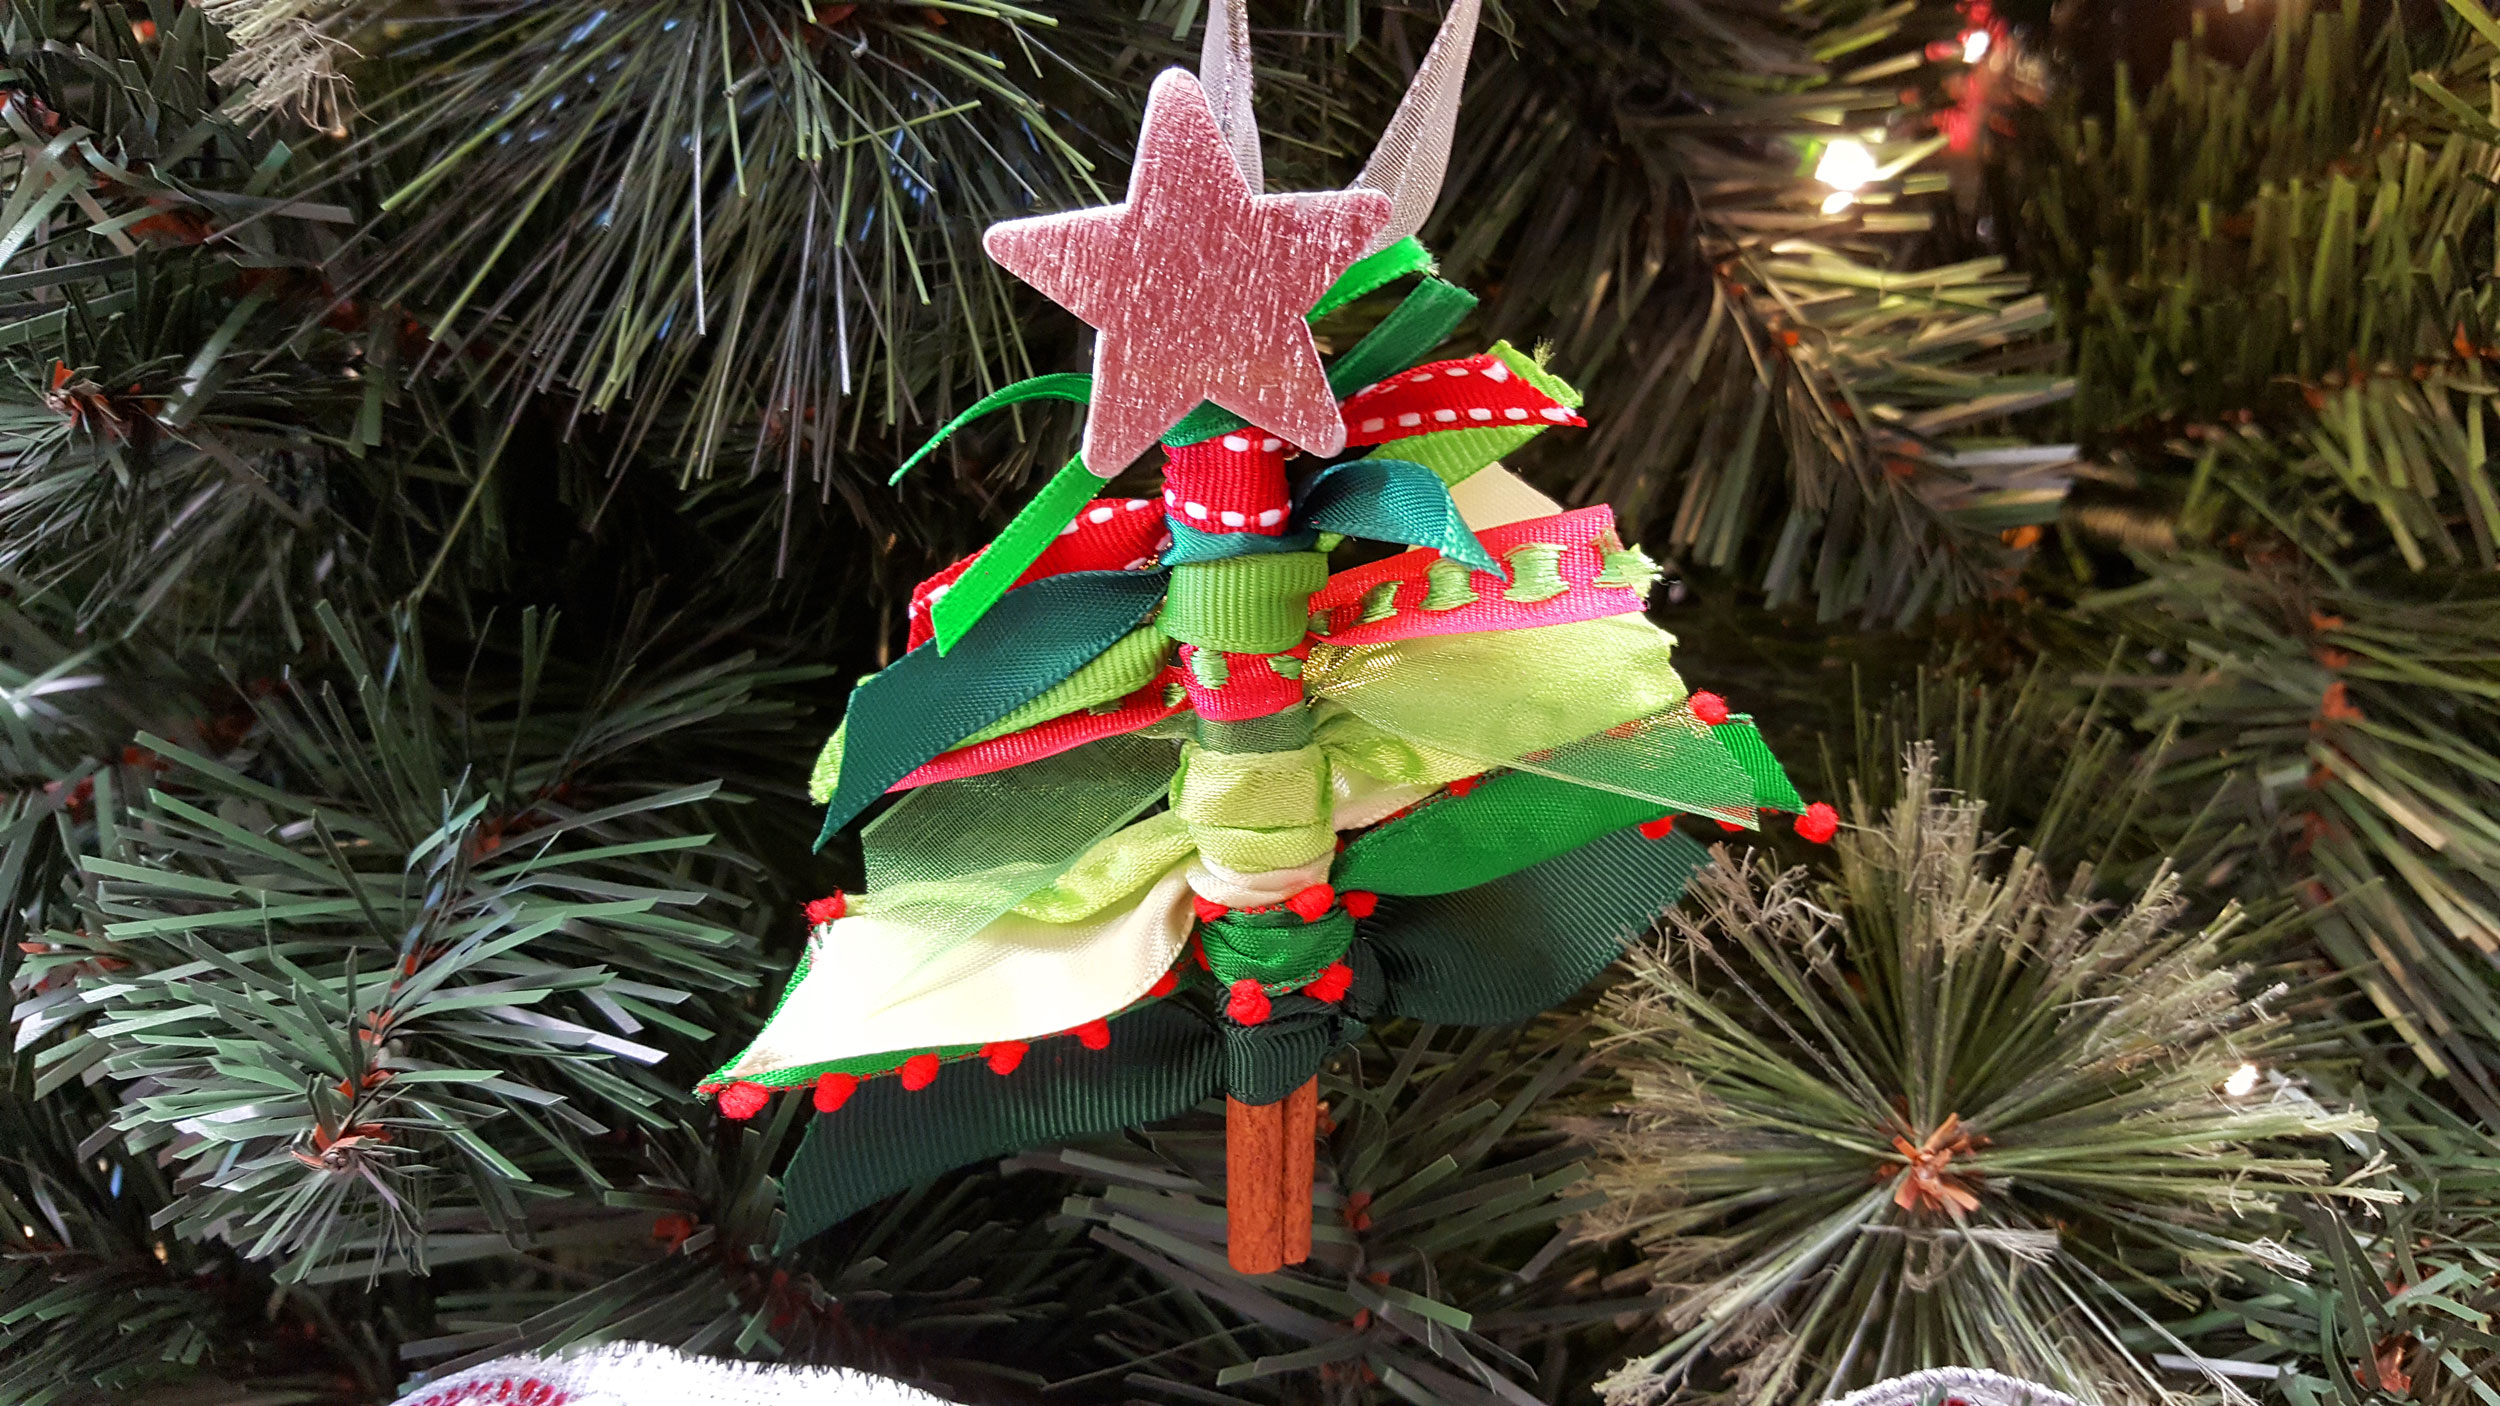 Completed Ribbon Tree Ornament hanging on a tree. | OrnamentShop.com